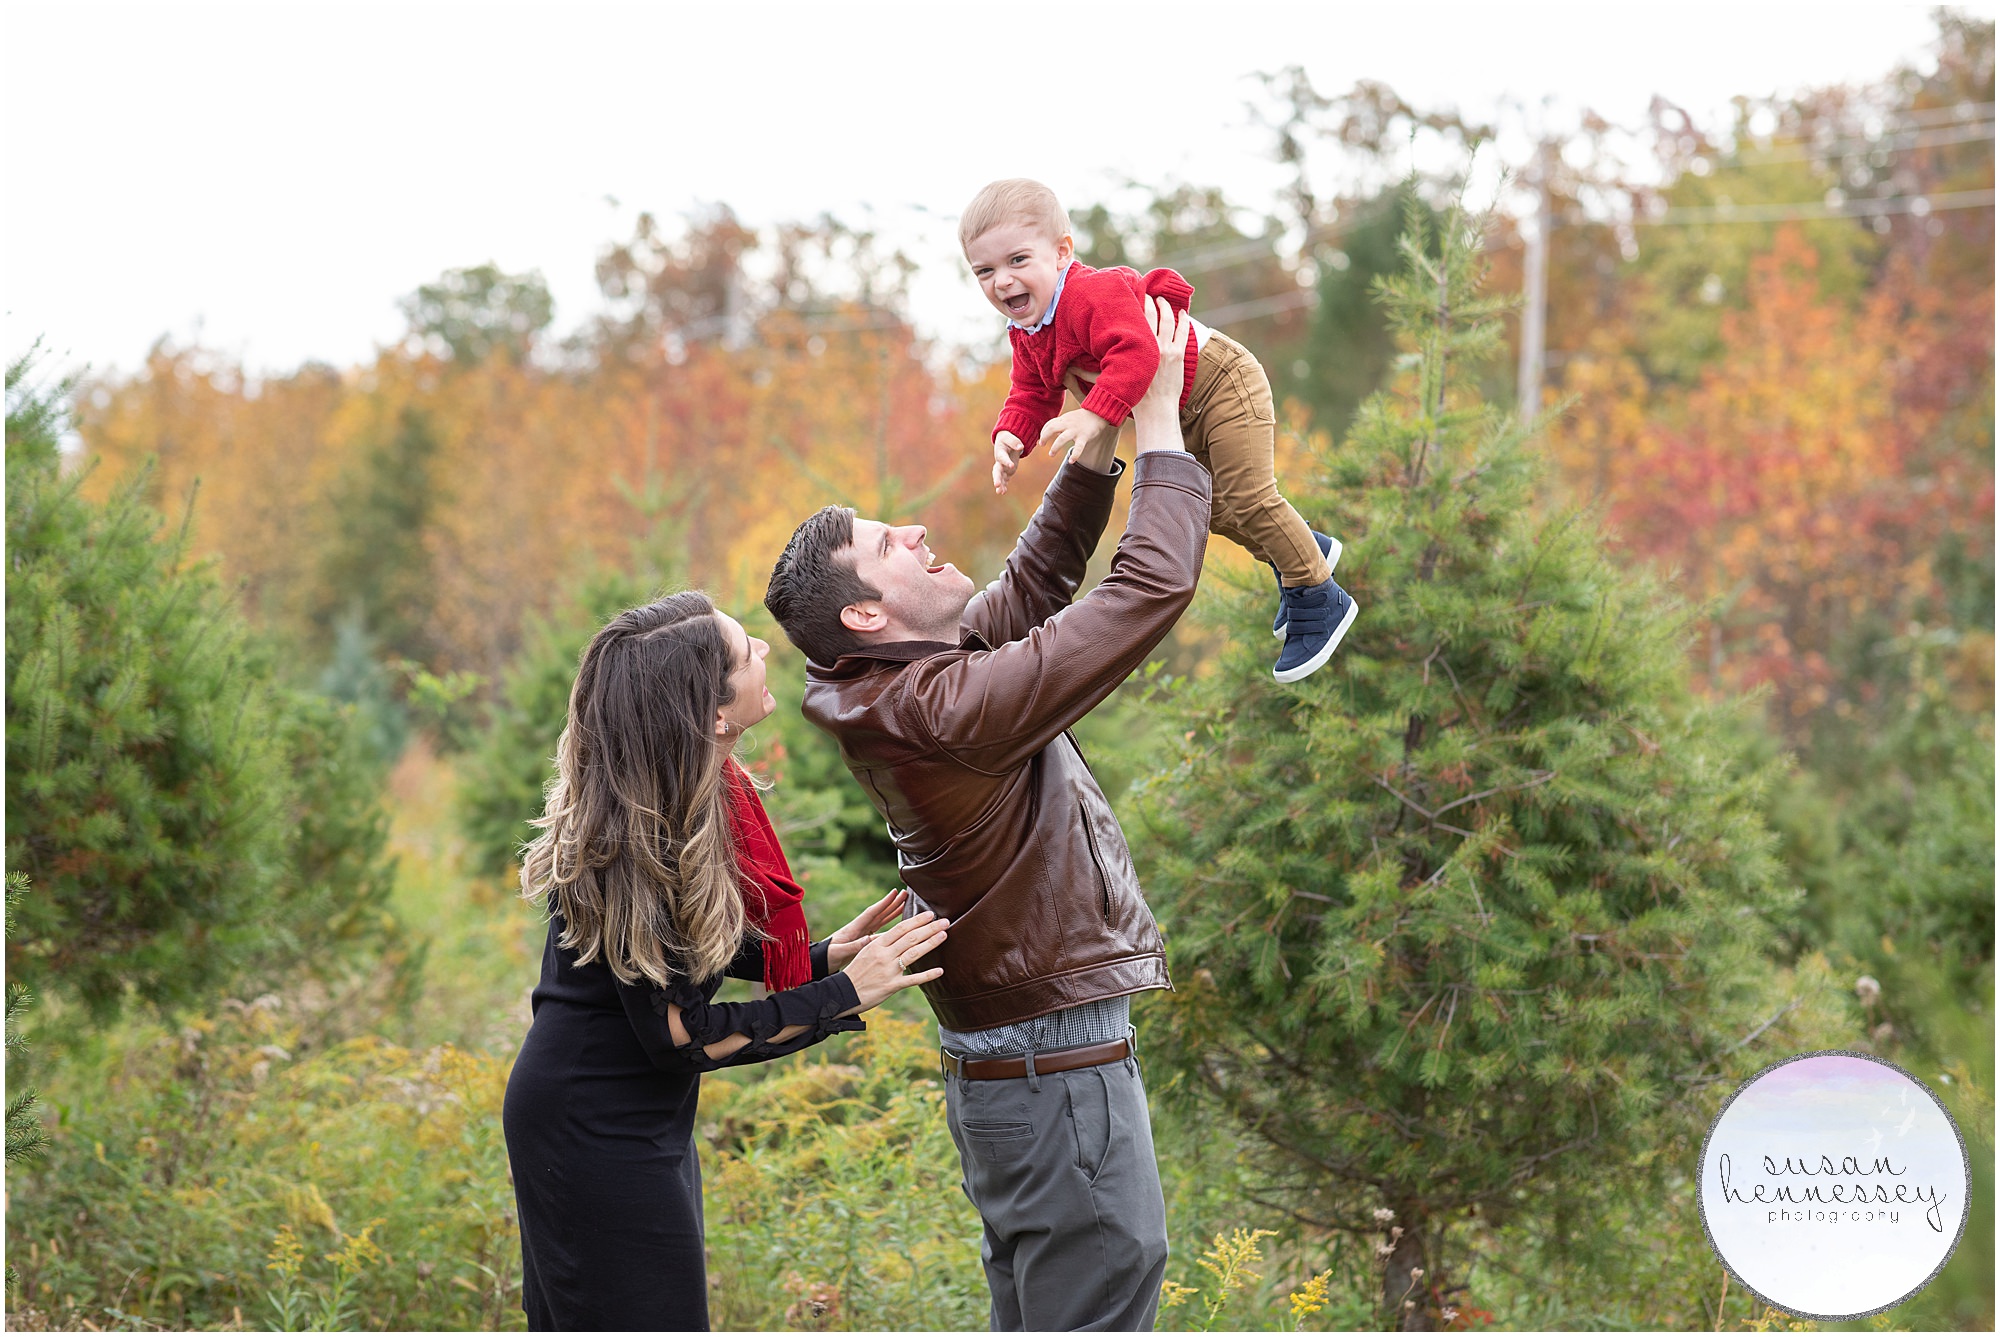 An Xmas Tree Farm is the perfect location for your South Jersey holiday family photo session